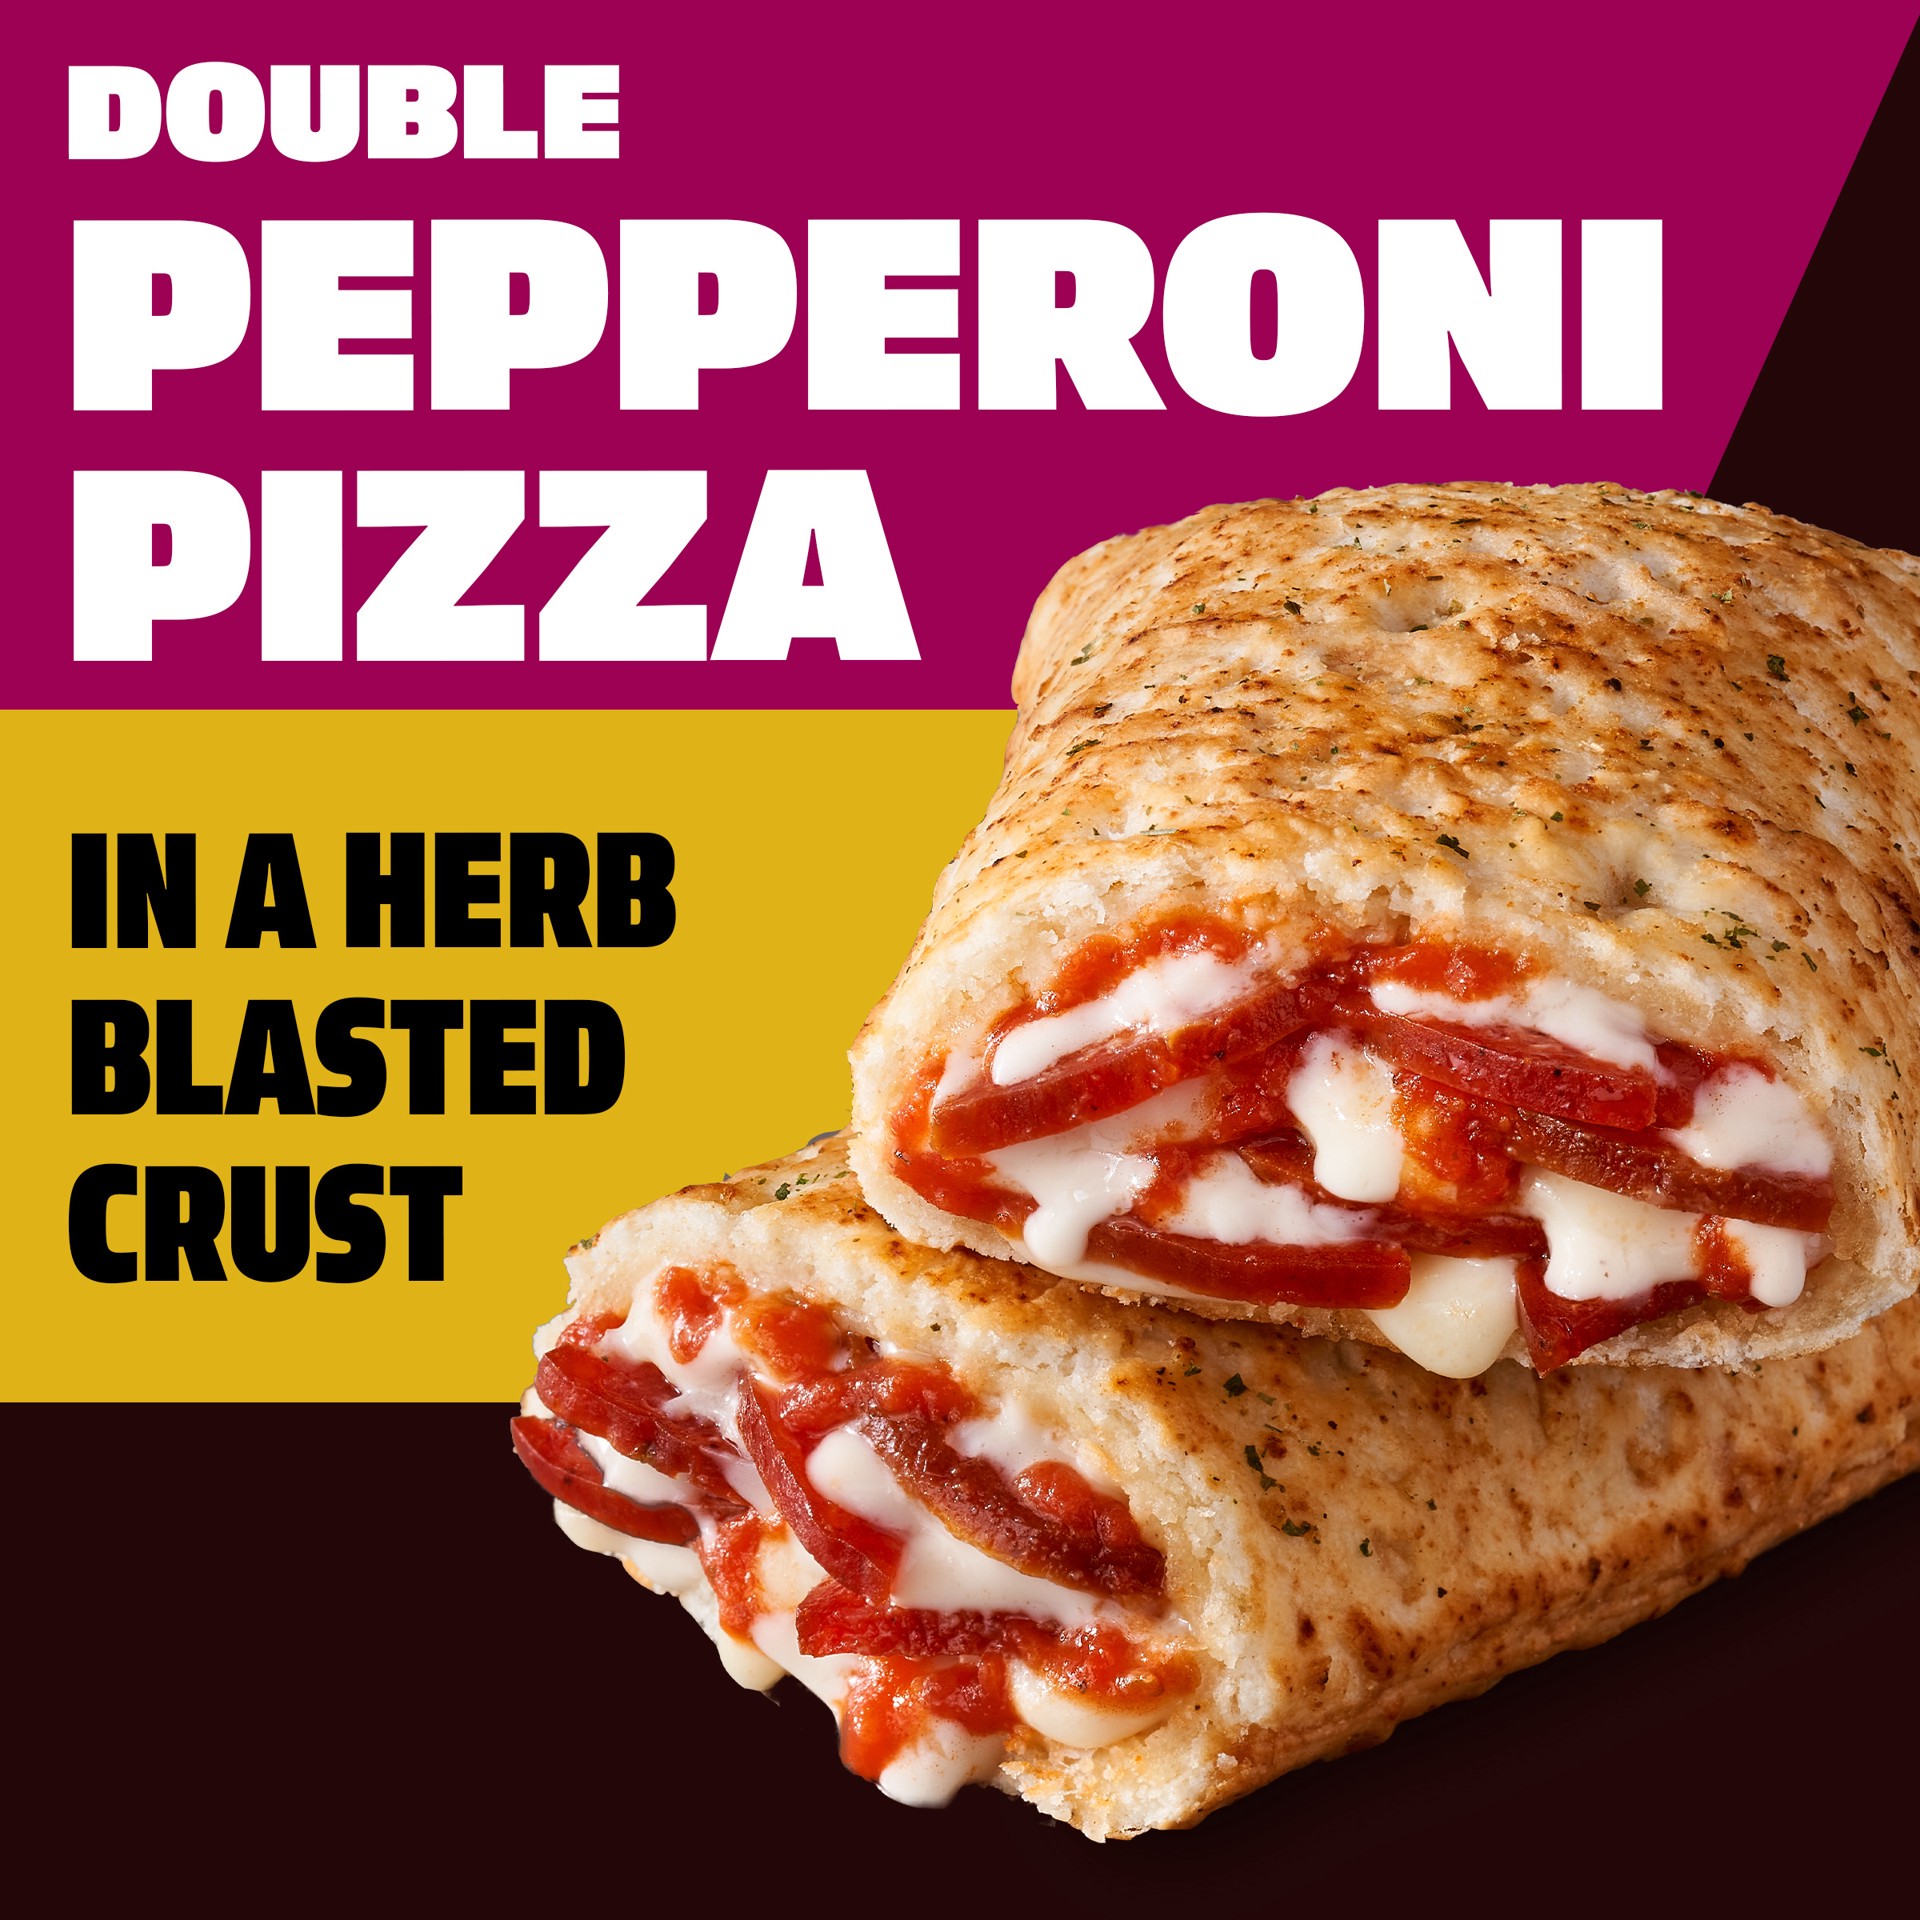 slide 2 of 3, Hot Pockets Big & Bold Double Pepperoni Pizza Frozen Snacks in a Herb Blasted Crust, Pizza Snacks Made with Reduced Fat Mozzarella Cheese, 2 Count Frozen Sandwiches, 13.5 oz